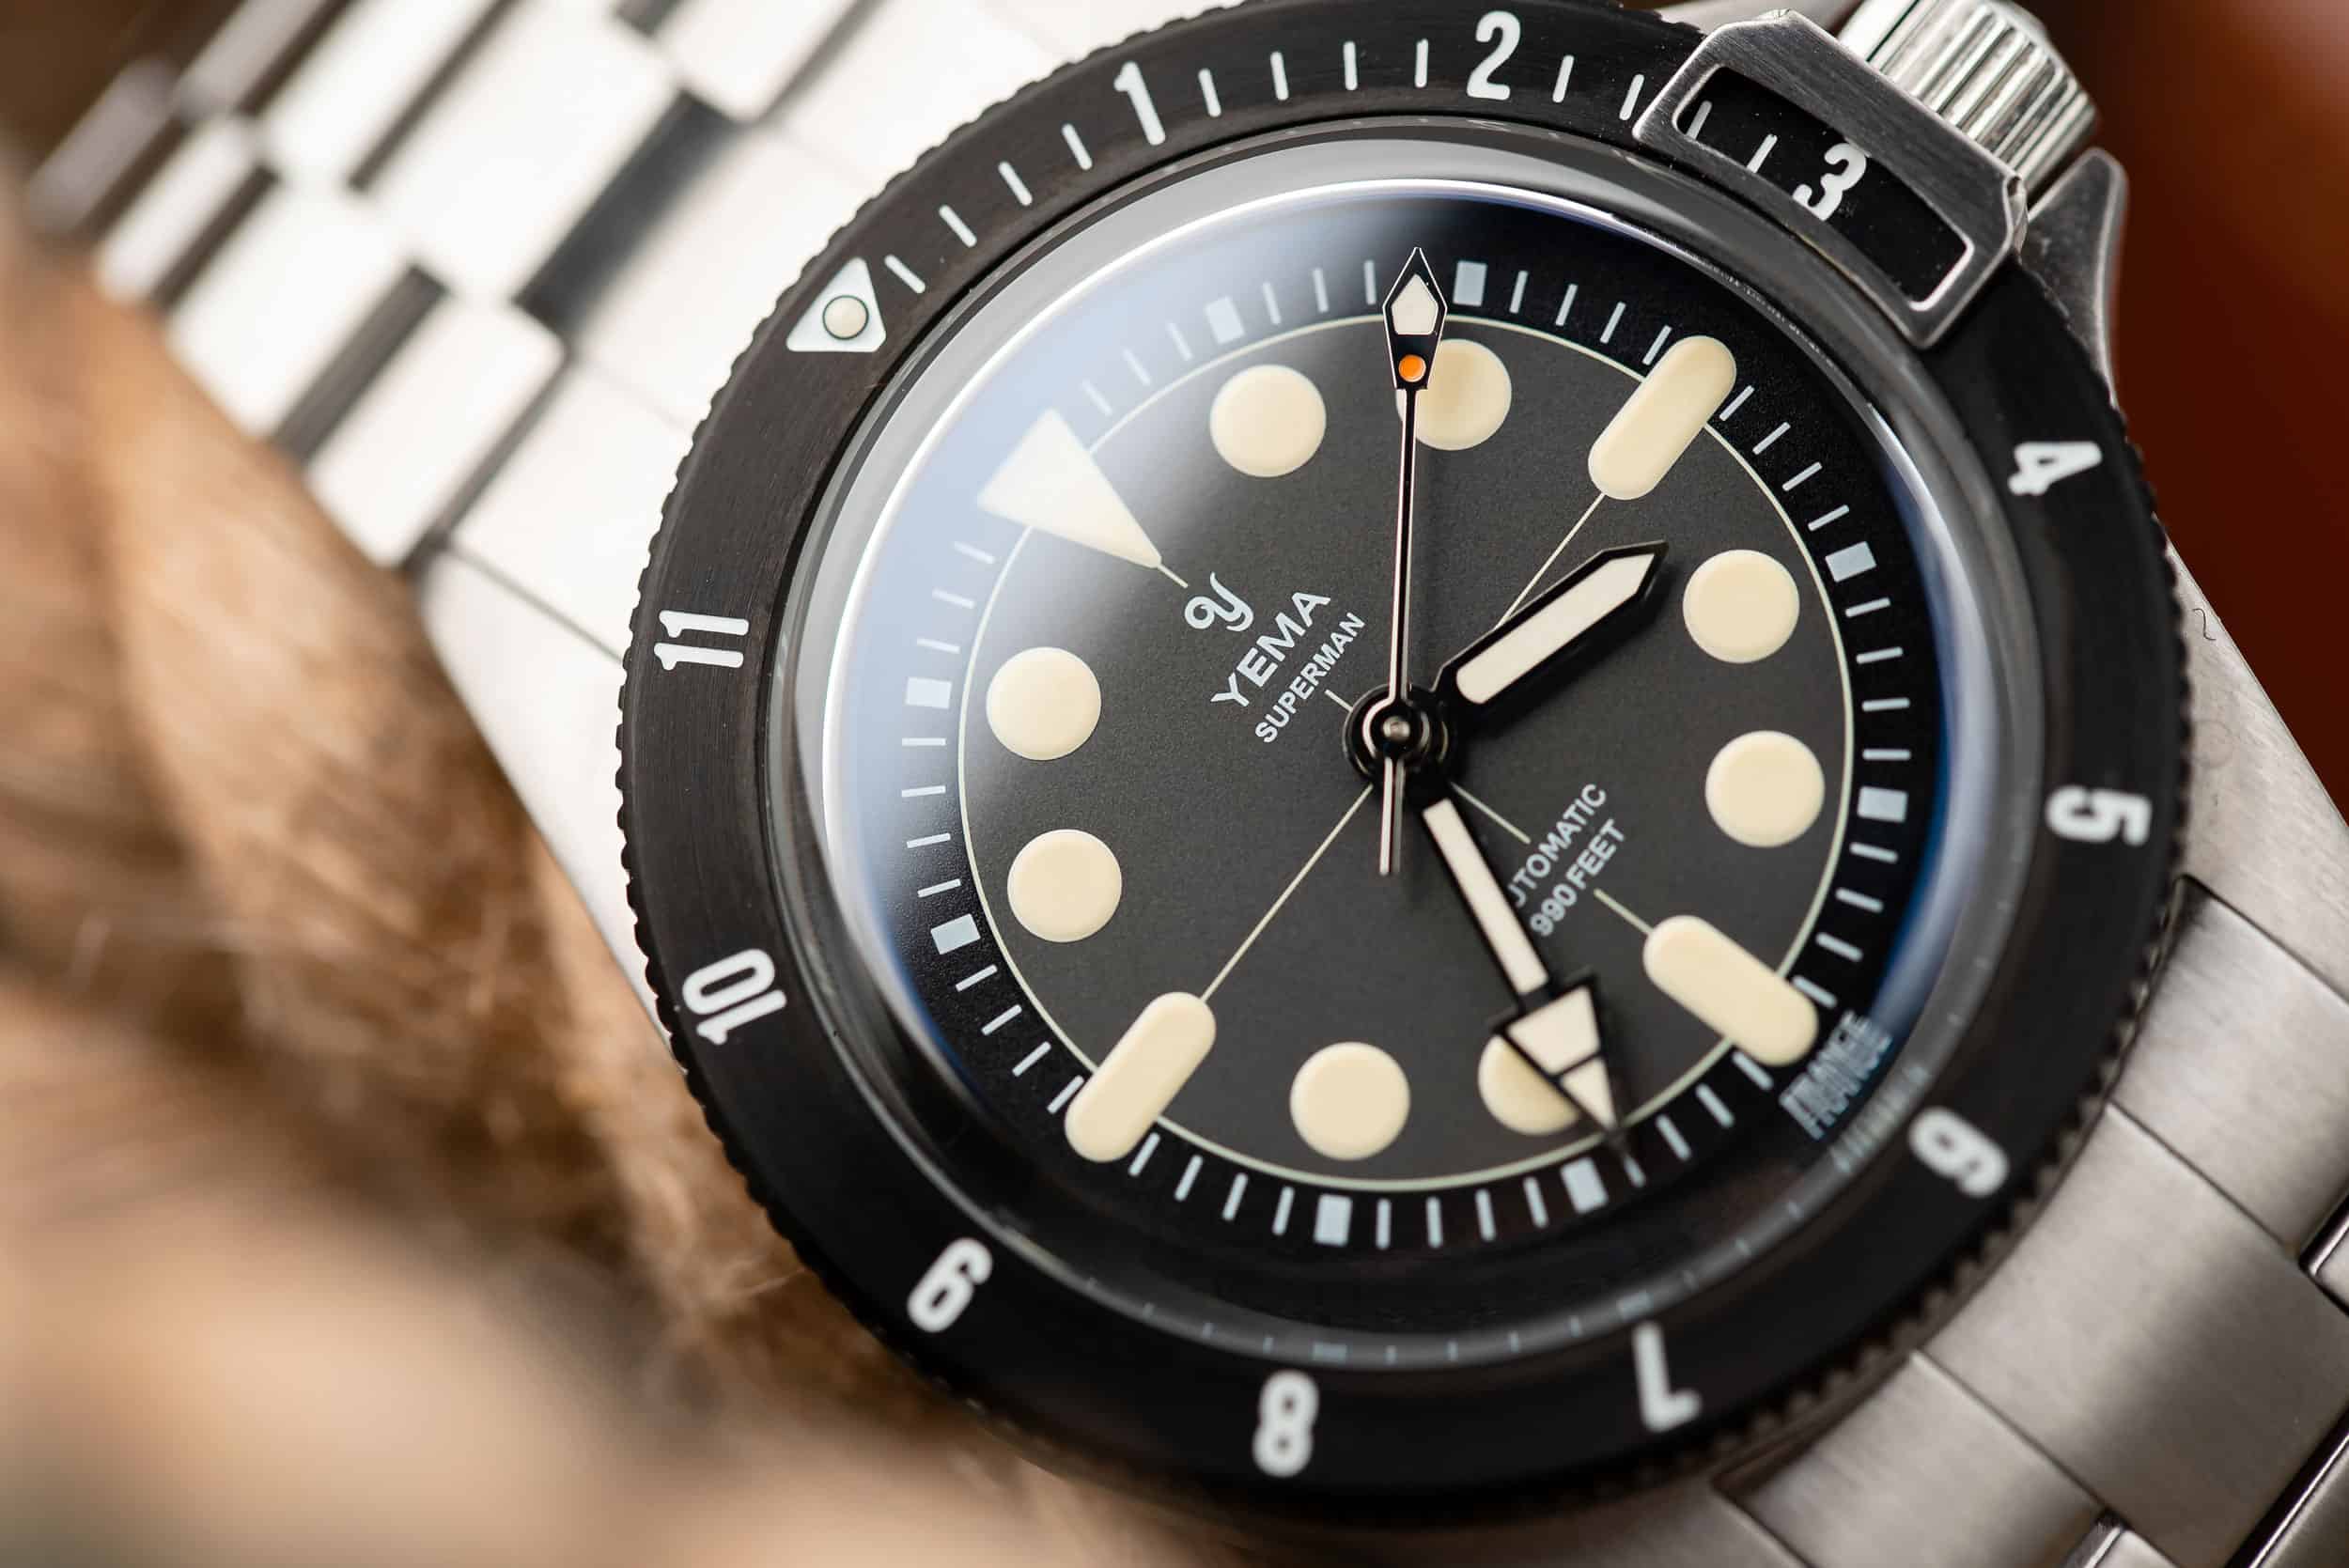 Introducing the Yema x Worn & Wound Superman Maxi Dial Limited 